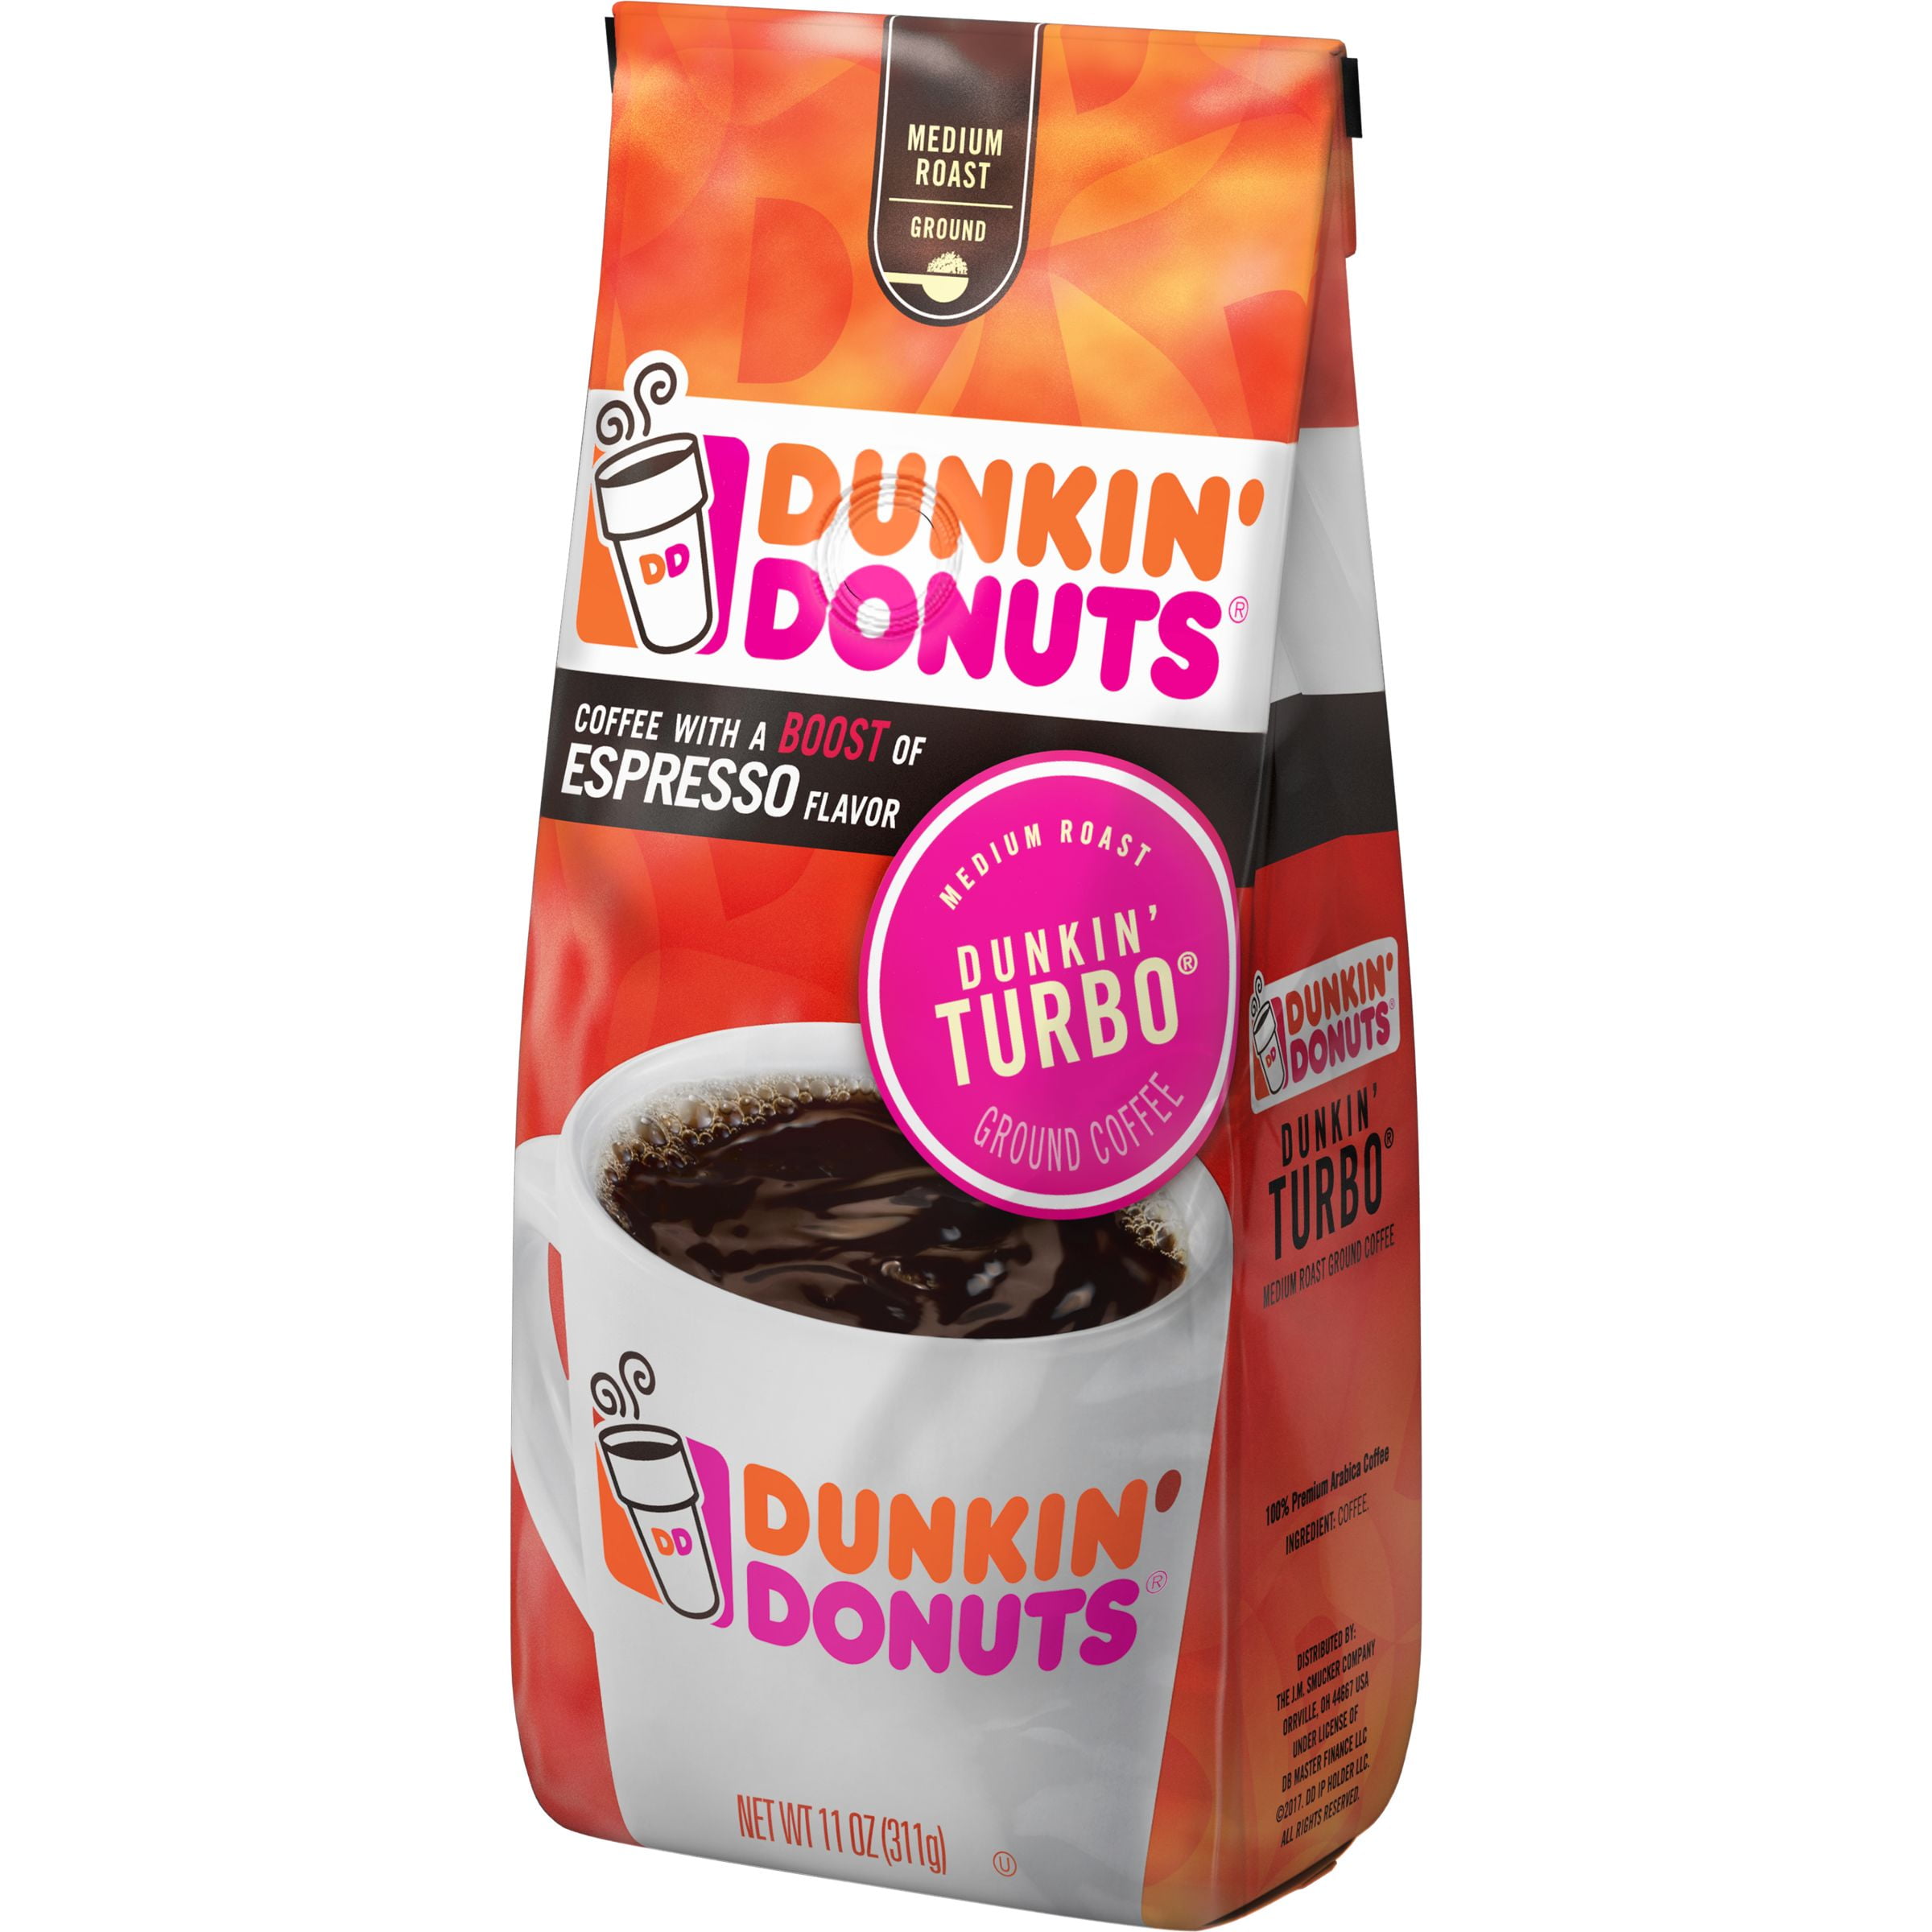 2012 DUNKIN DONUTS COFFEE HAPPY BIRTHDAY GIFT CARD COLLECTIBLE NO VALUE 